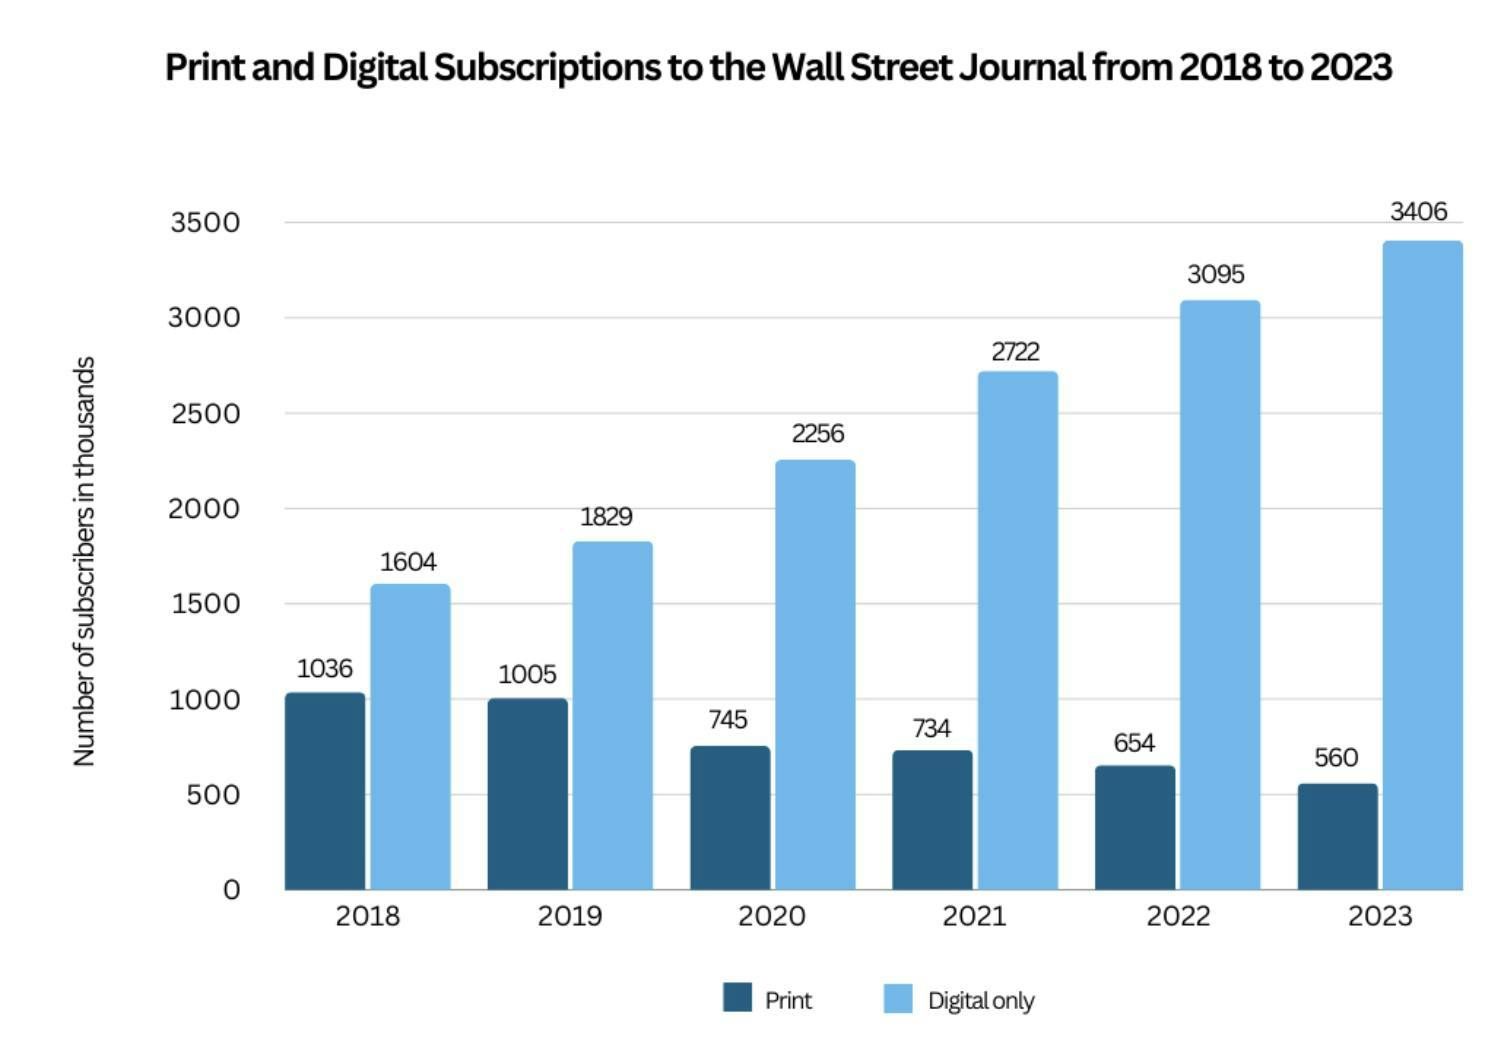 Bar graph showing decreasing print subscriptions to WSJ, while digital subscriptions are on the rise